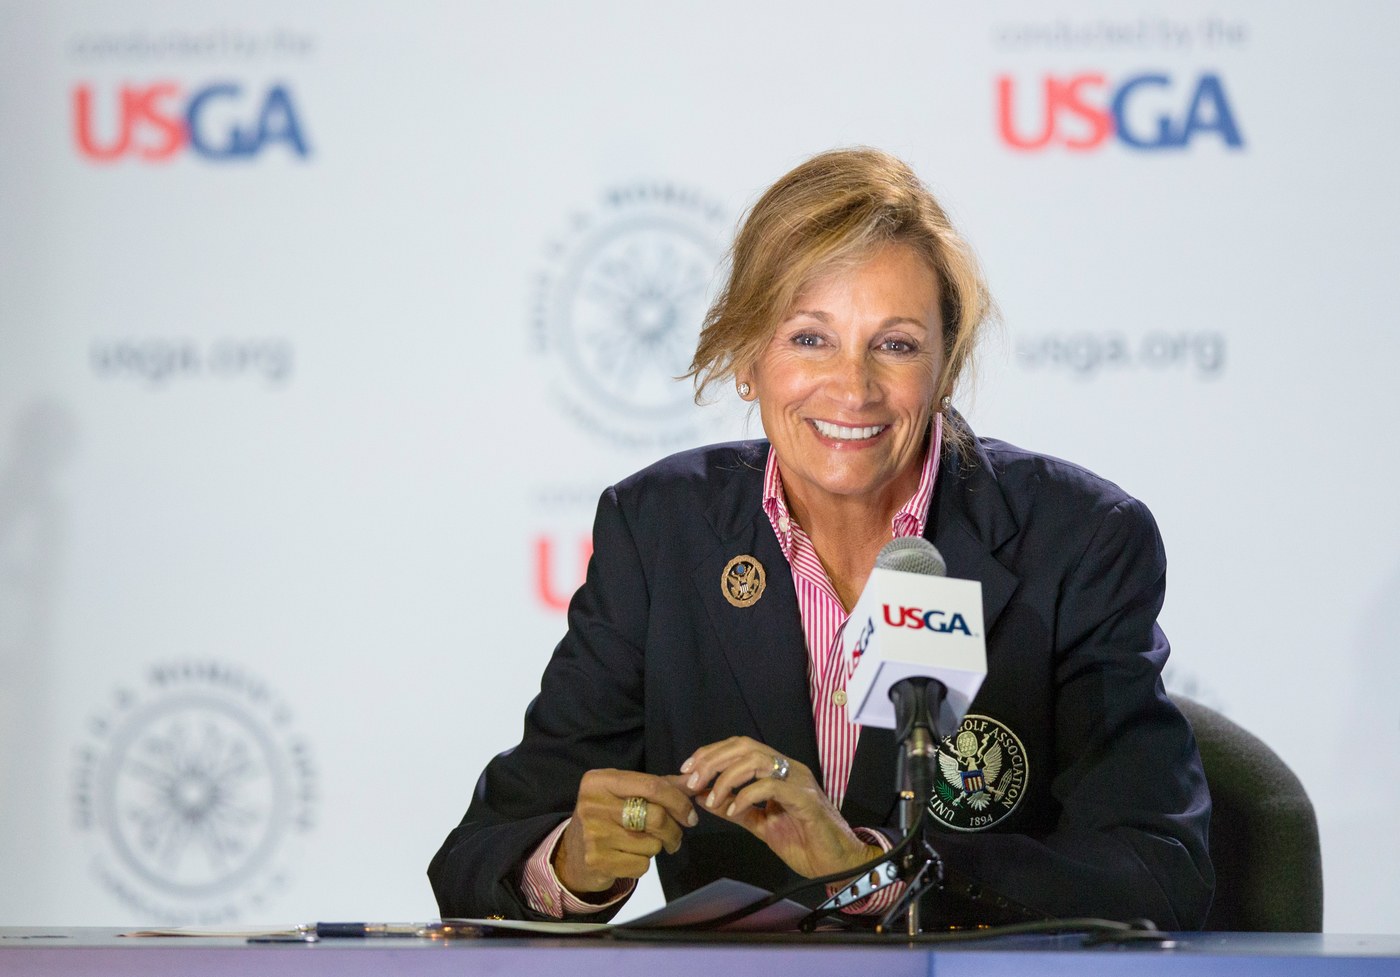 USGA President Diane Murphy Proves She Doesn't Know Squat About Women's Golf